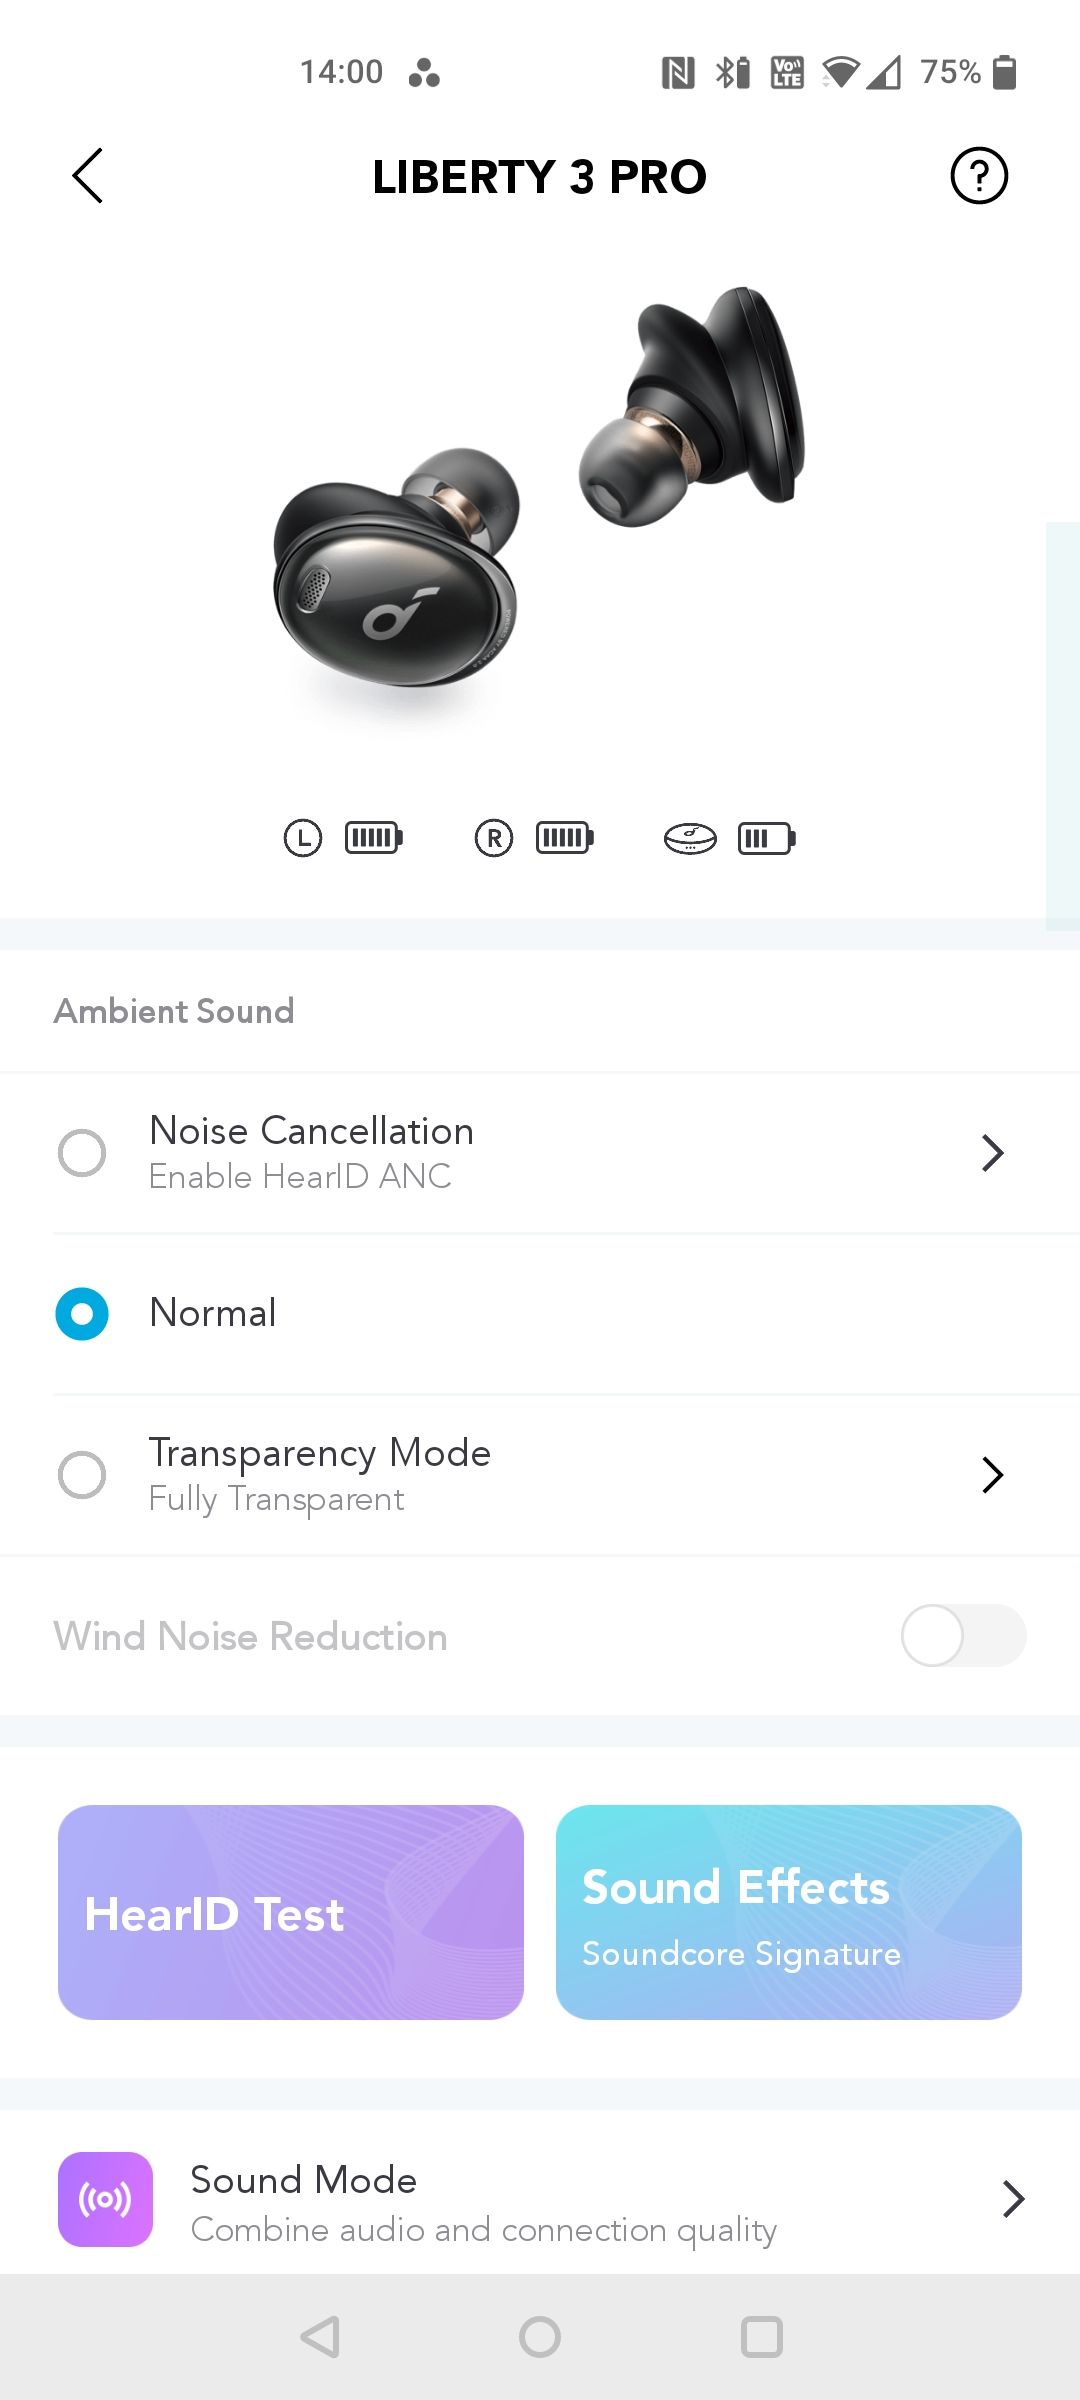 anker sound liberty 3 pro home page